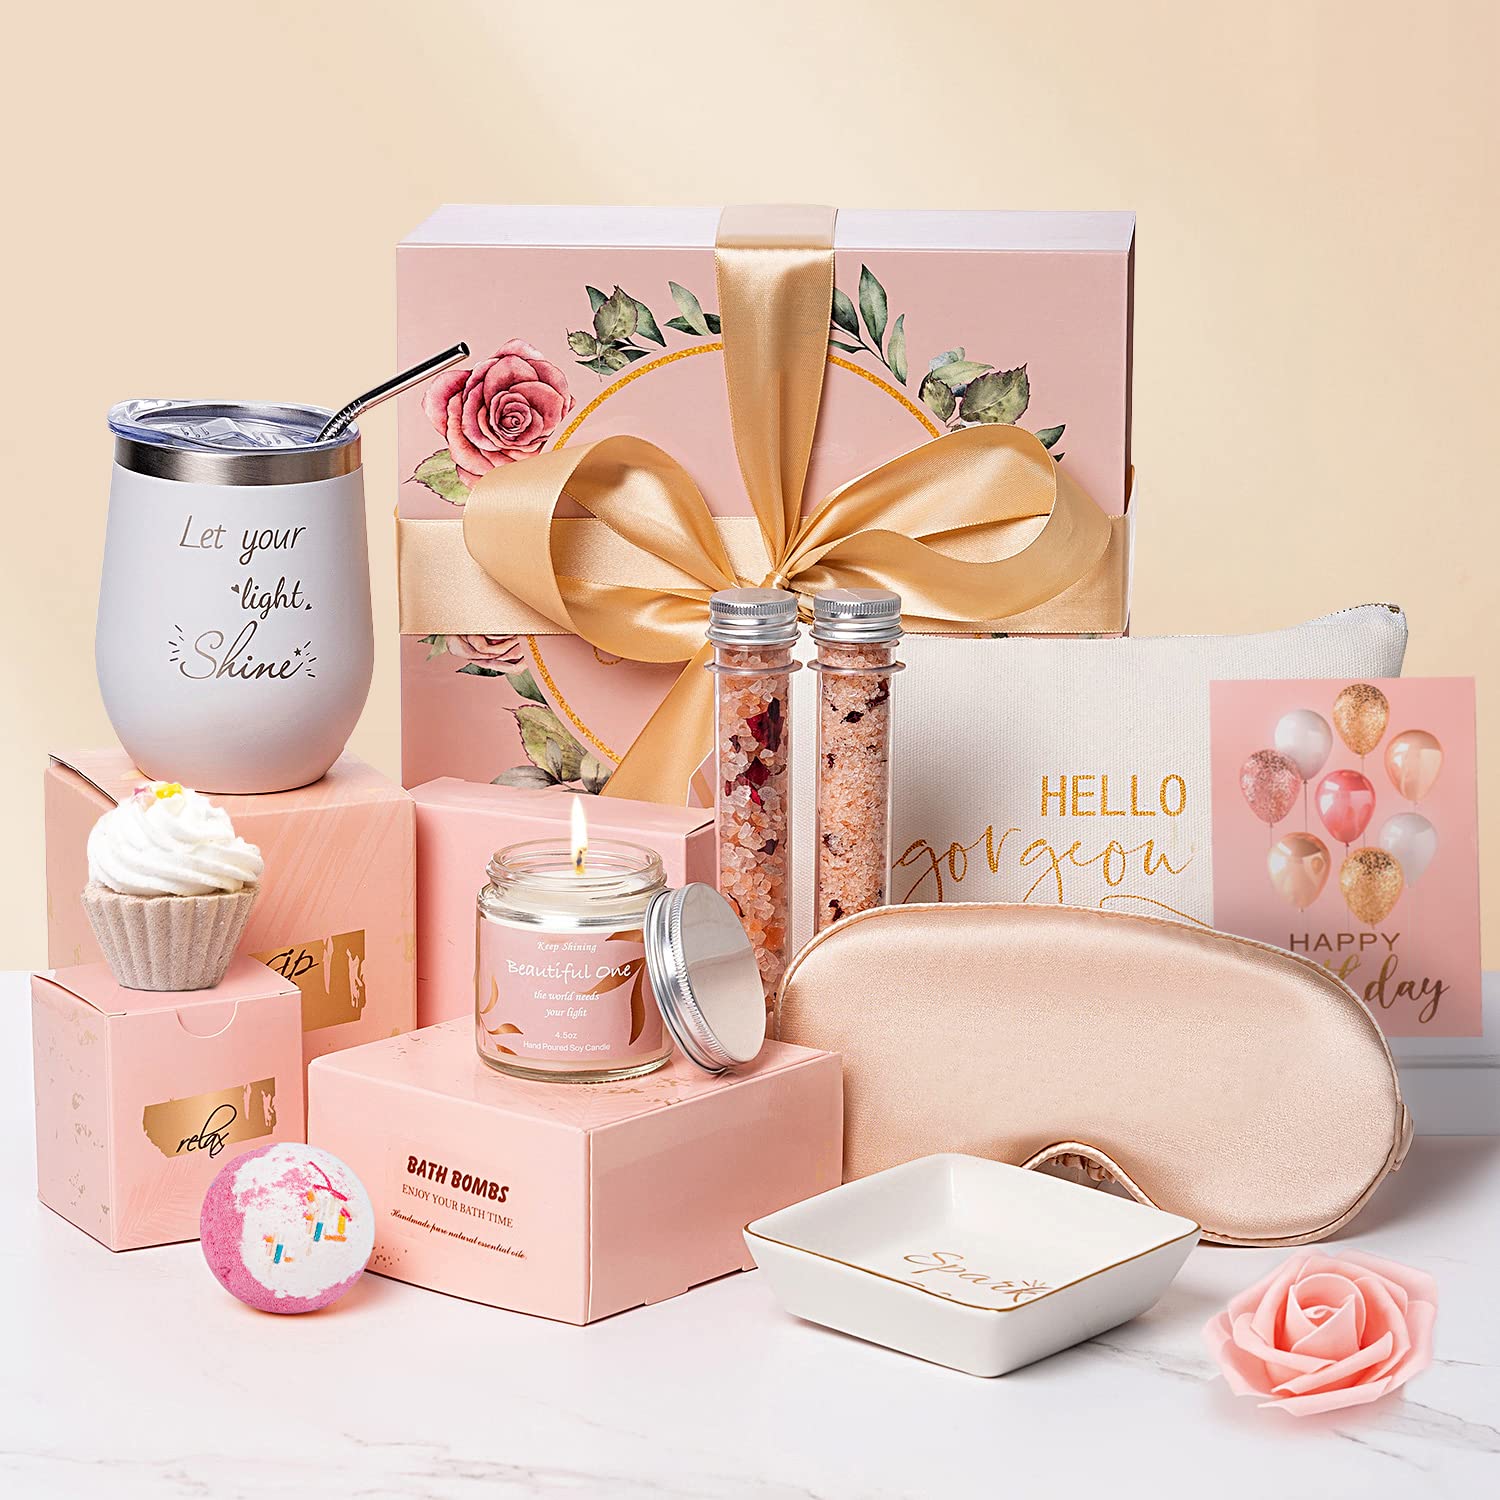 Happy Birthday Gifts for Women Spa Set Gift Basket for Best Friends Mom Unique Birthday Box Gifts for Sister Girlfriend Teacher Female Her Bday Wine Tumbler for Woman Who Has Everything